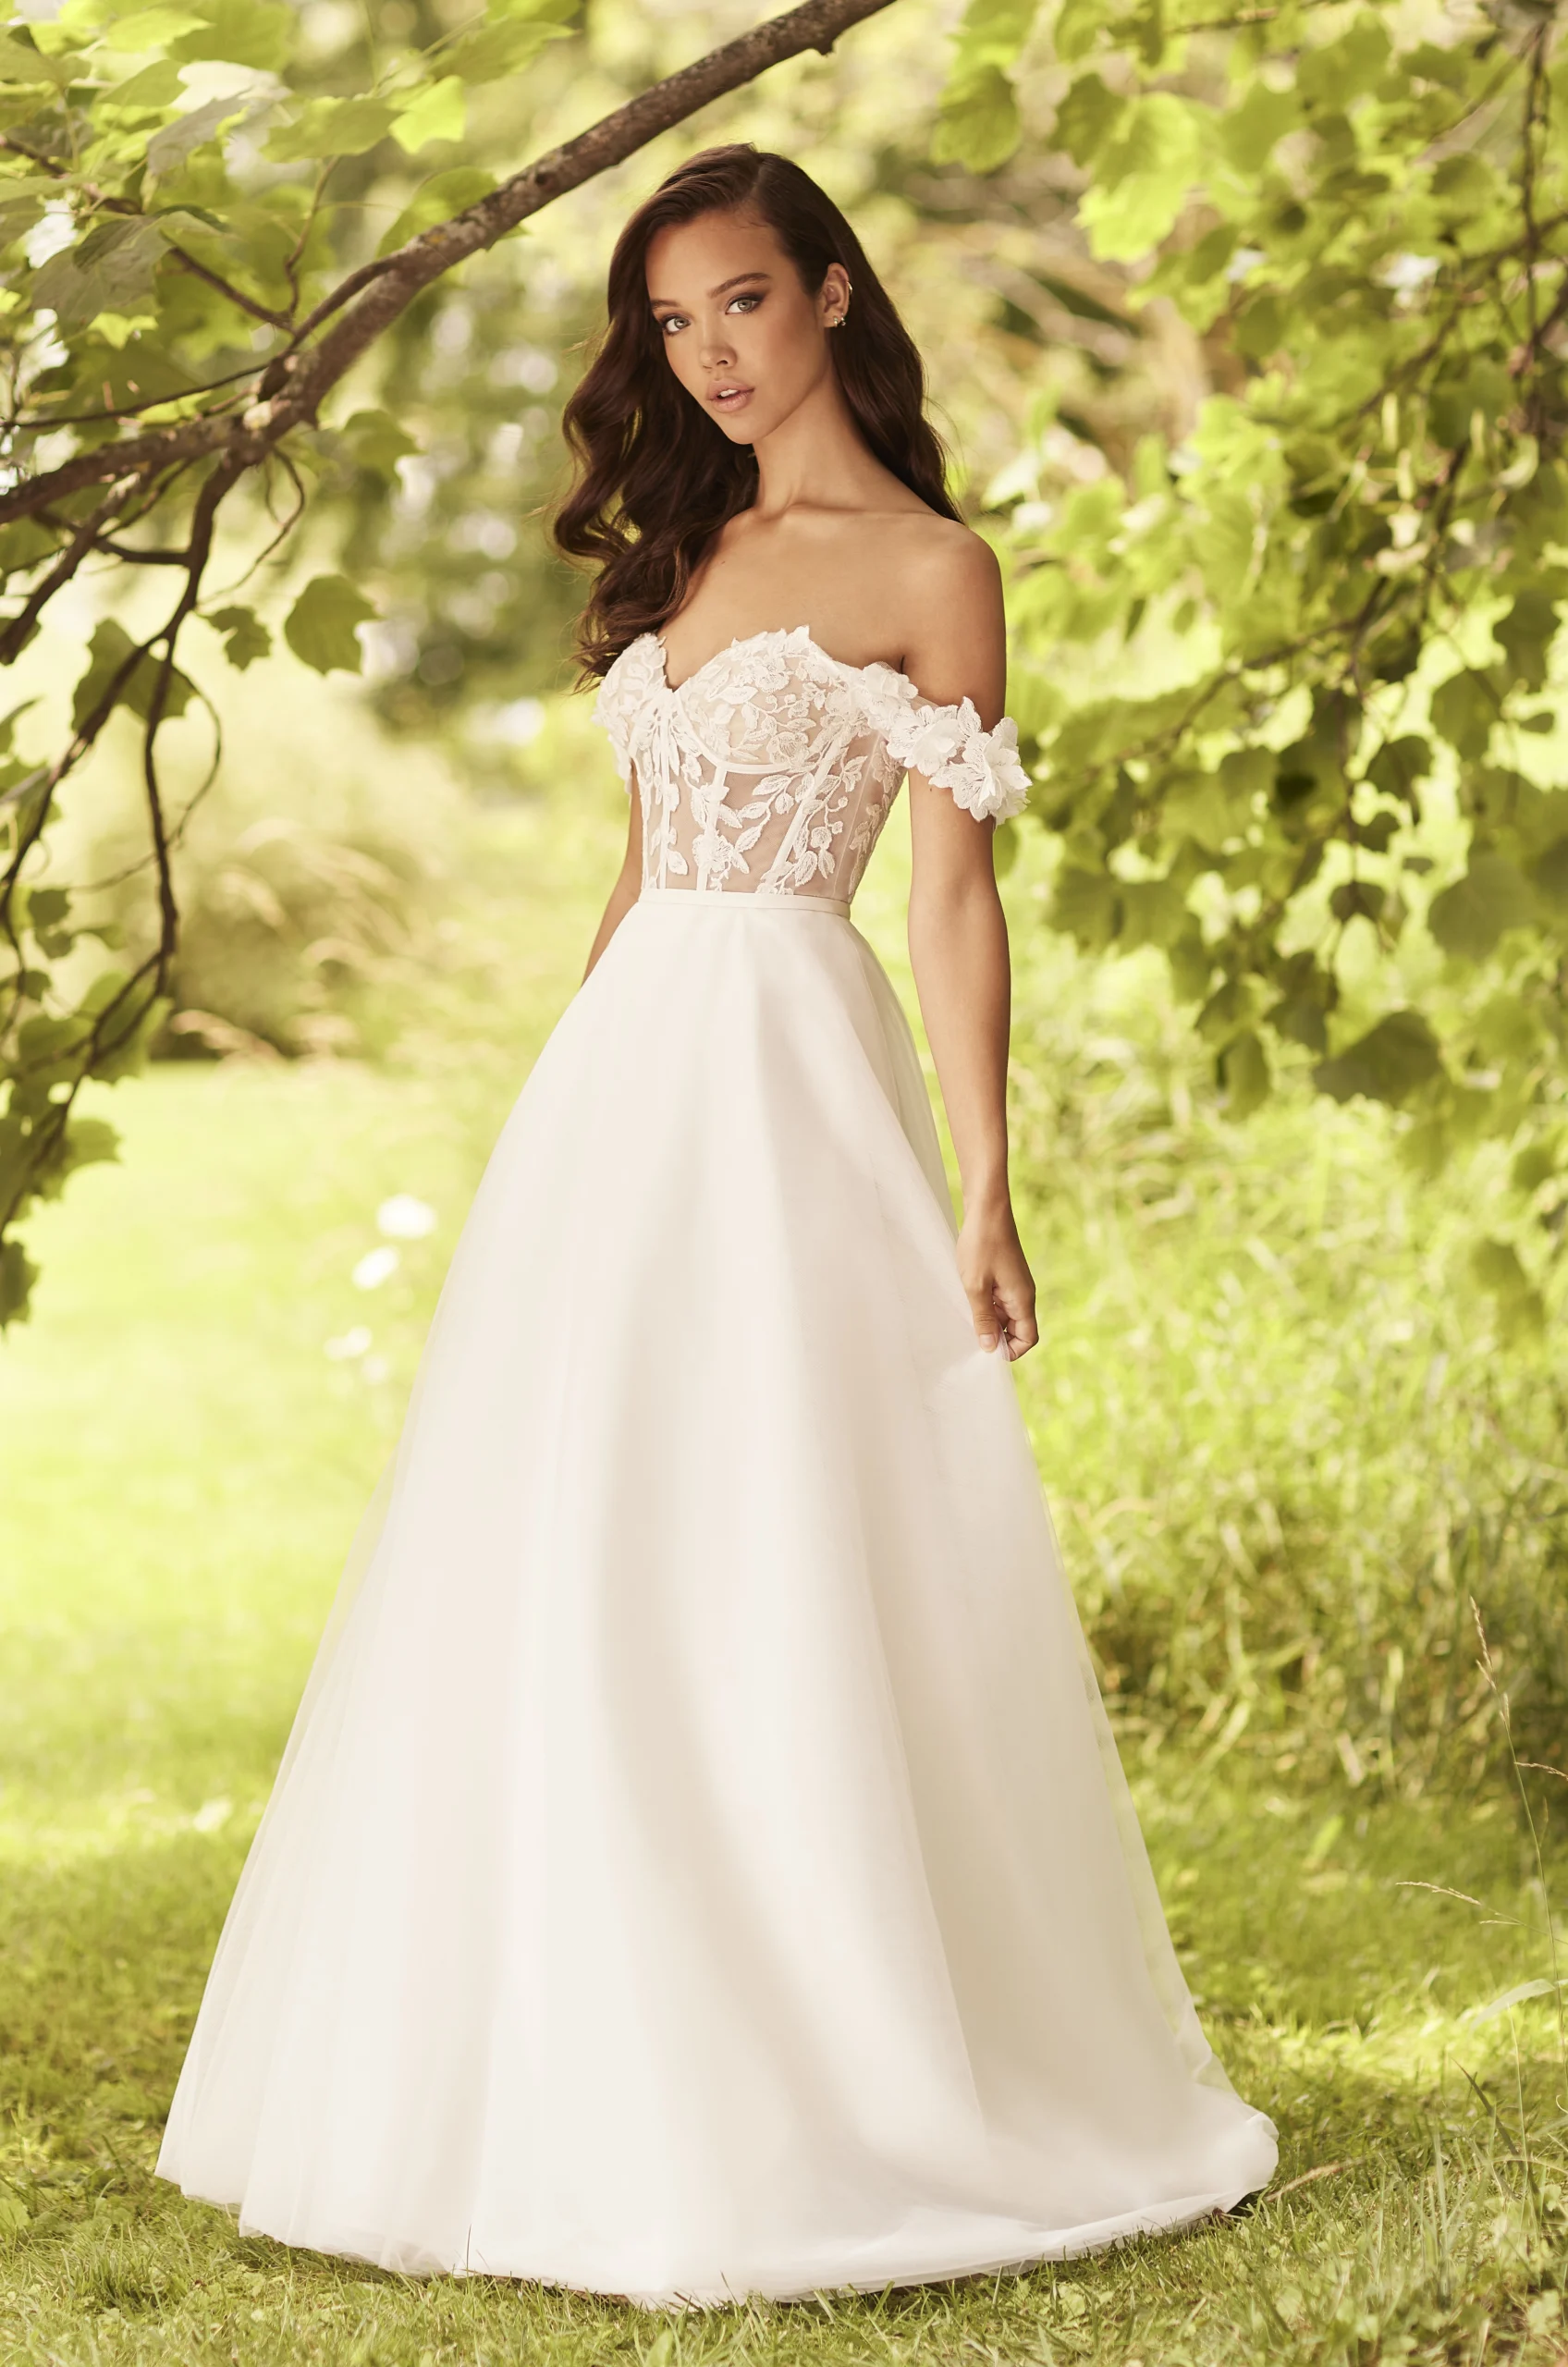 Lace and Tulle Corset Wedding Dress - Style #P5086 from Paloma Blanca